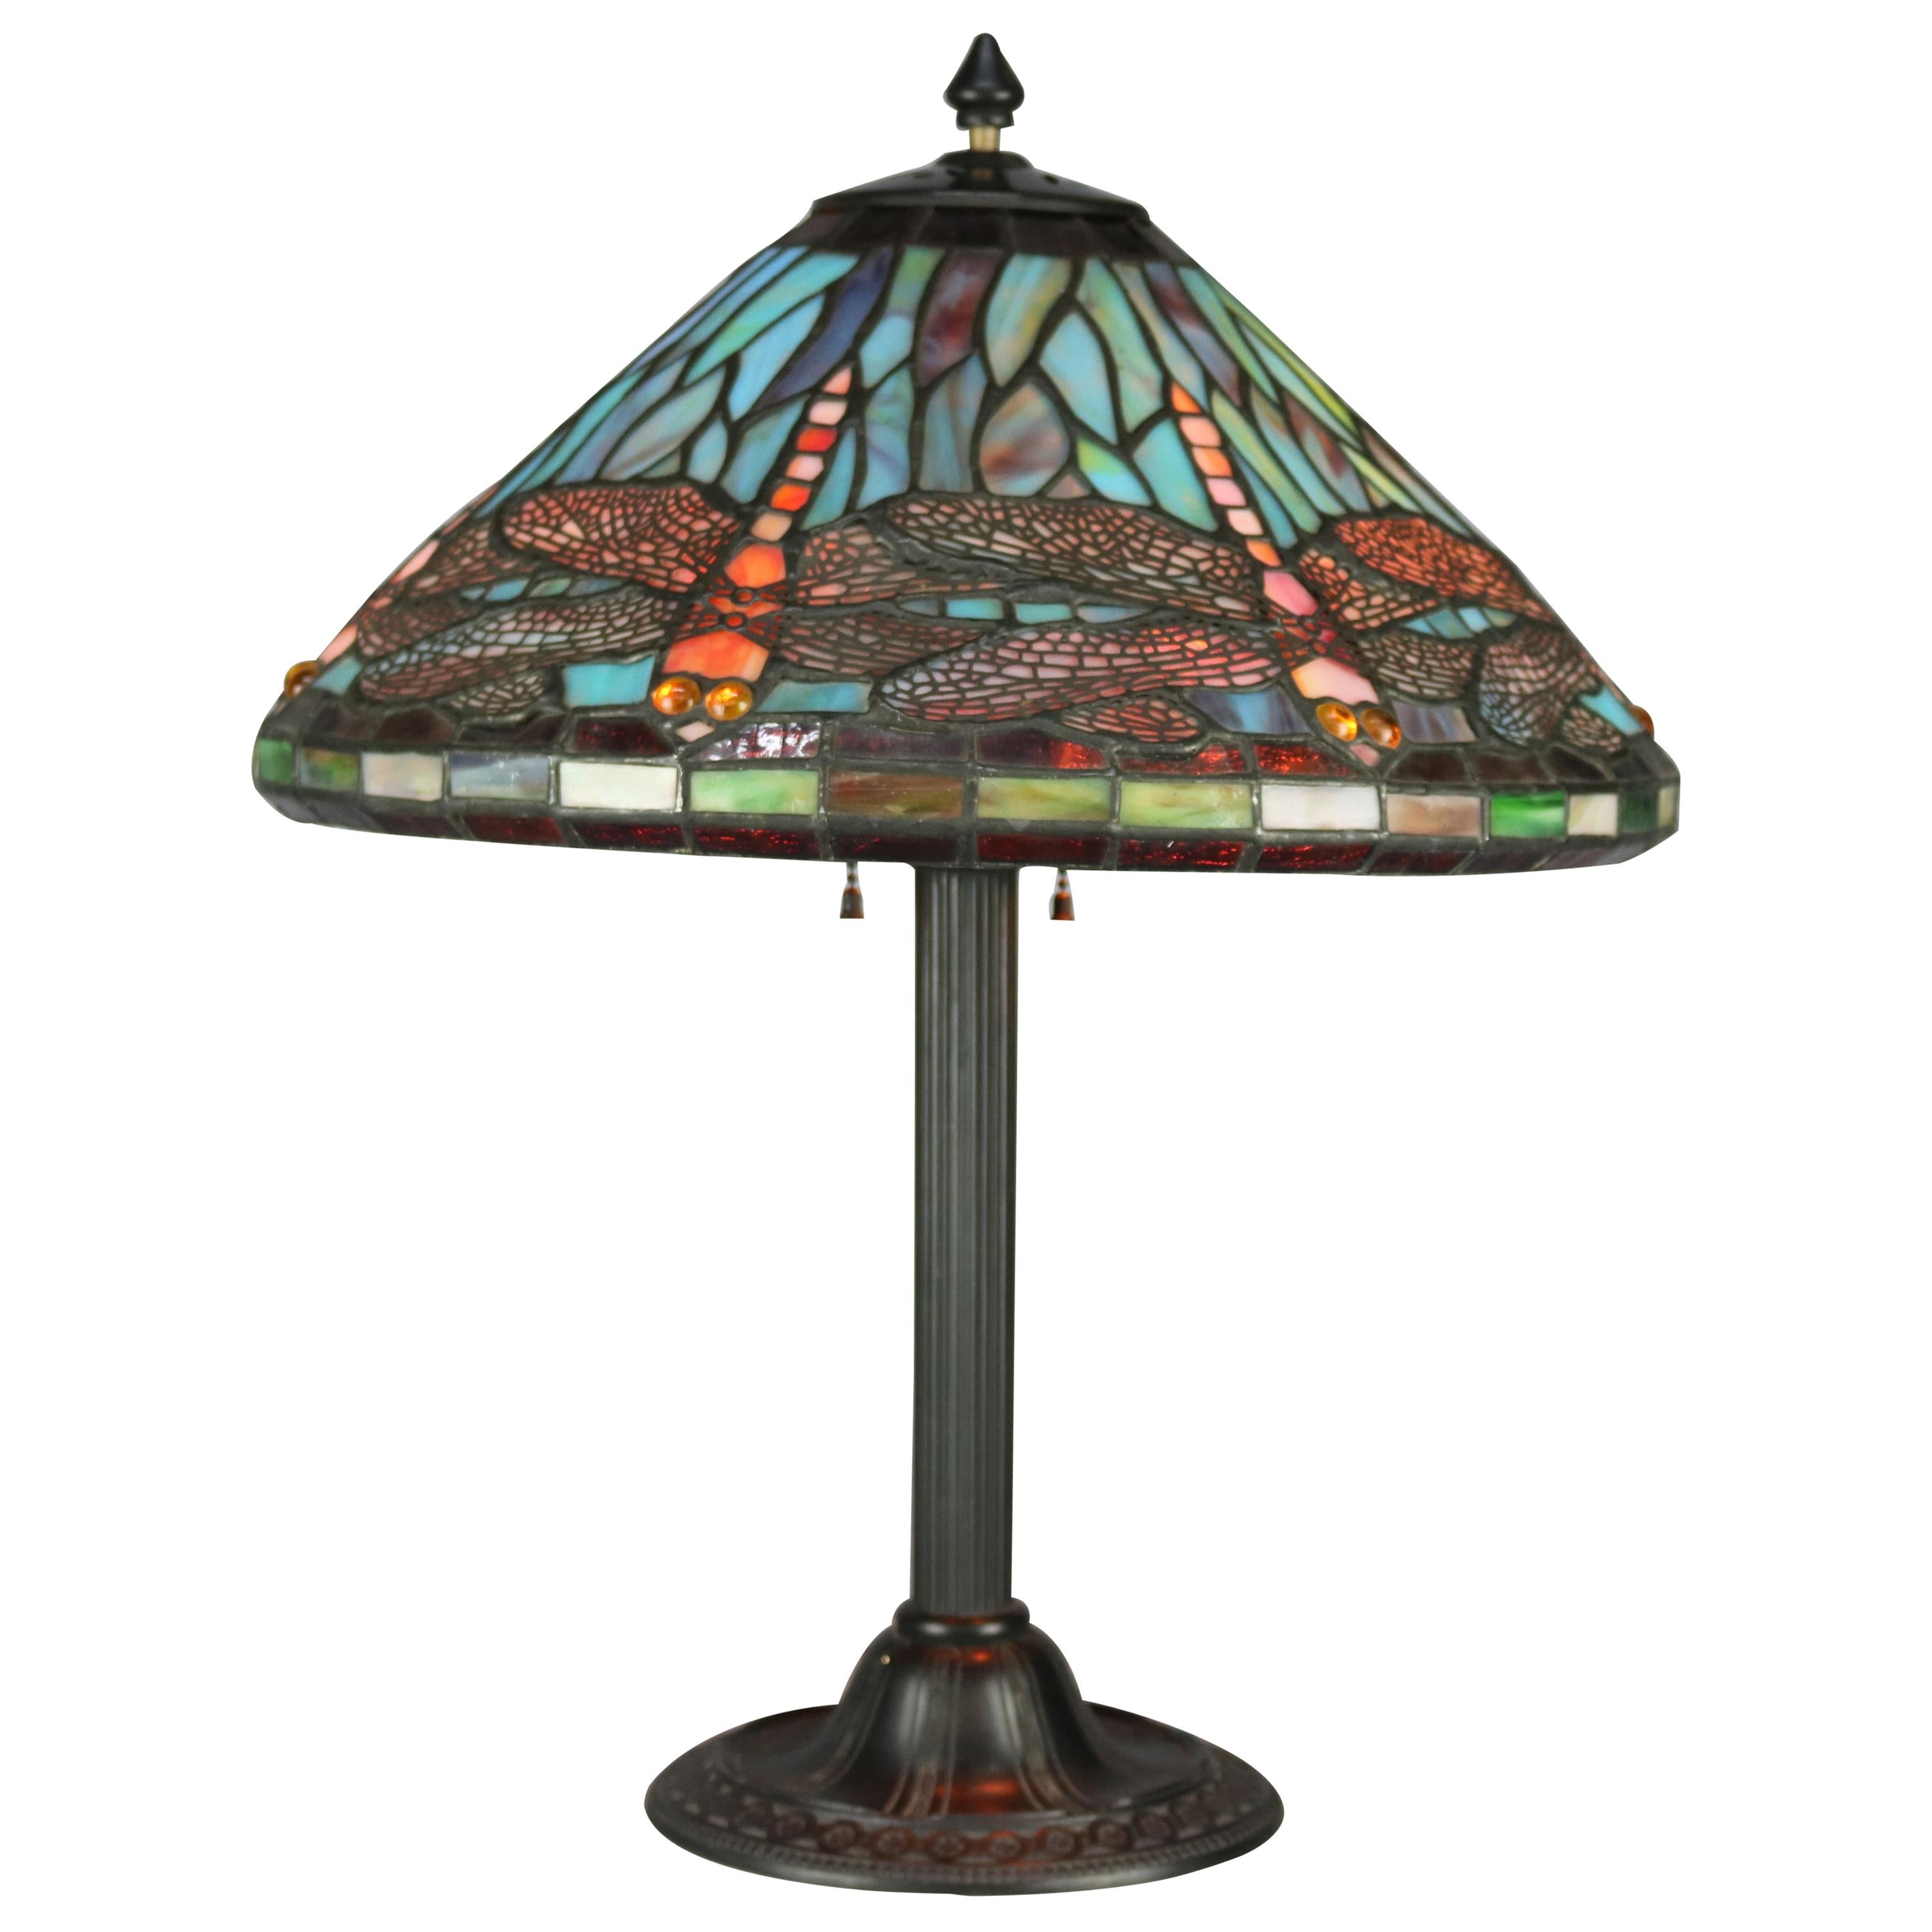 Vintage Tiffany Style Mosaic Jeweled and Leaded Glass Dragonfly Table Lamp